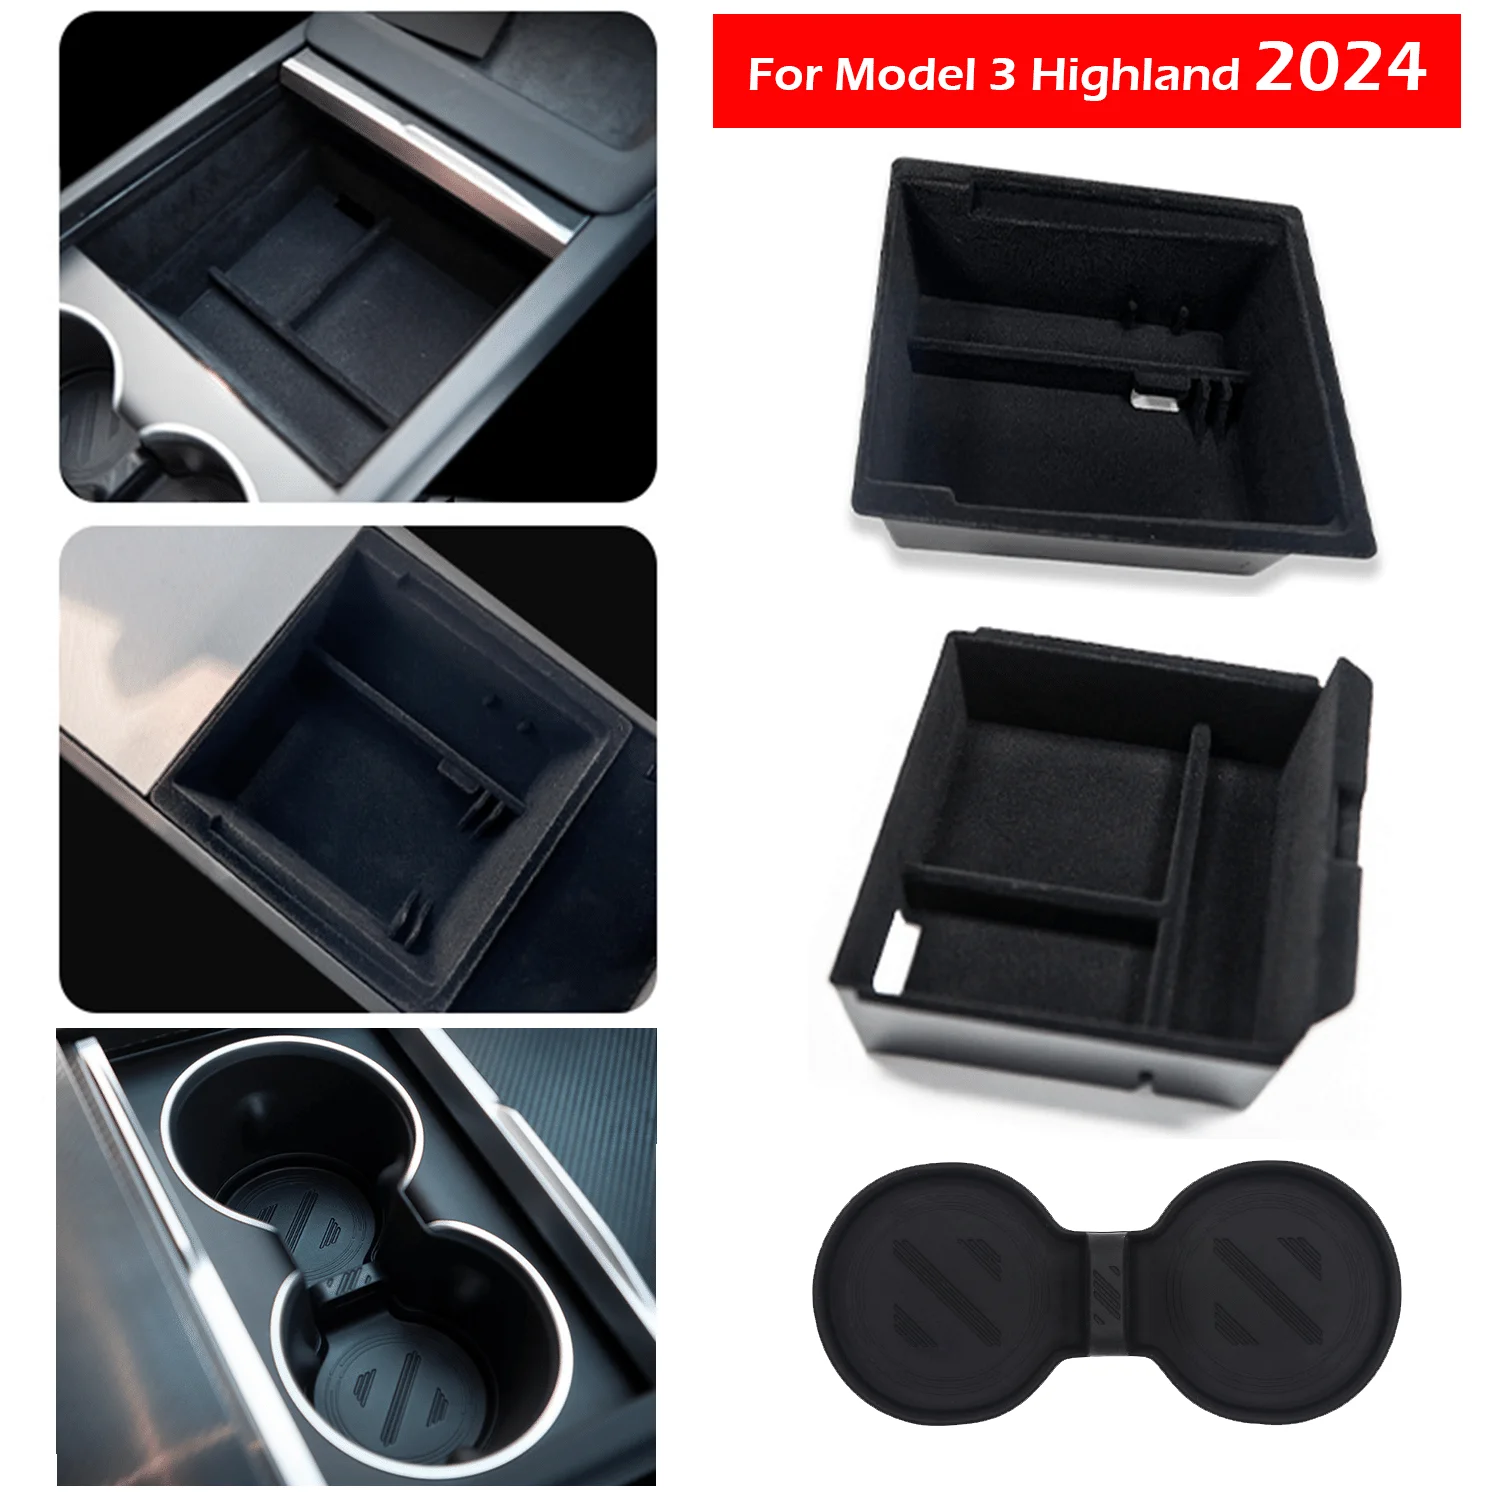 

For Tesla Model 3 Highland 2024 NEW 3PCS Flocked Material Center Console Organizer Tray Storage Box, Cup Holder Insert